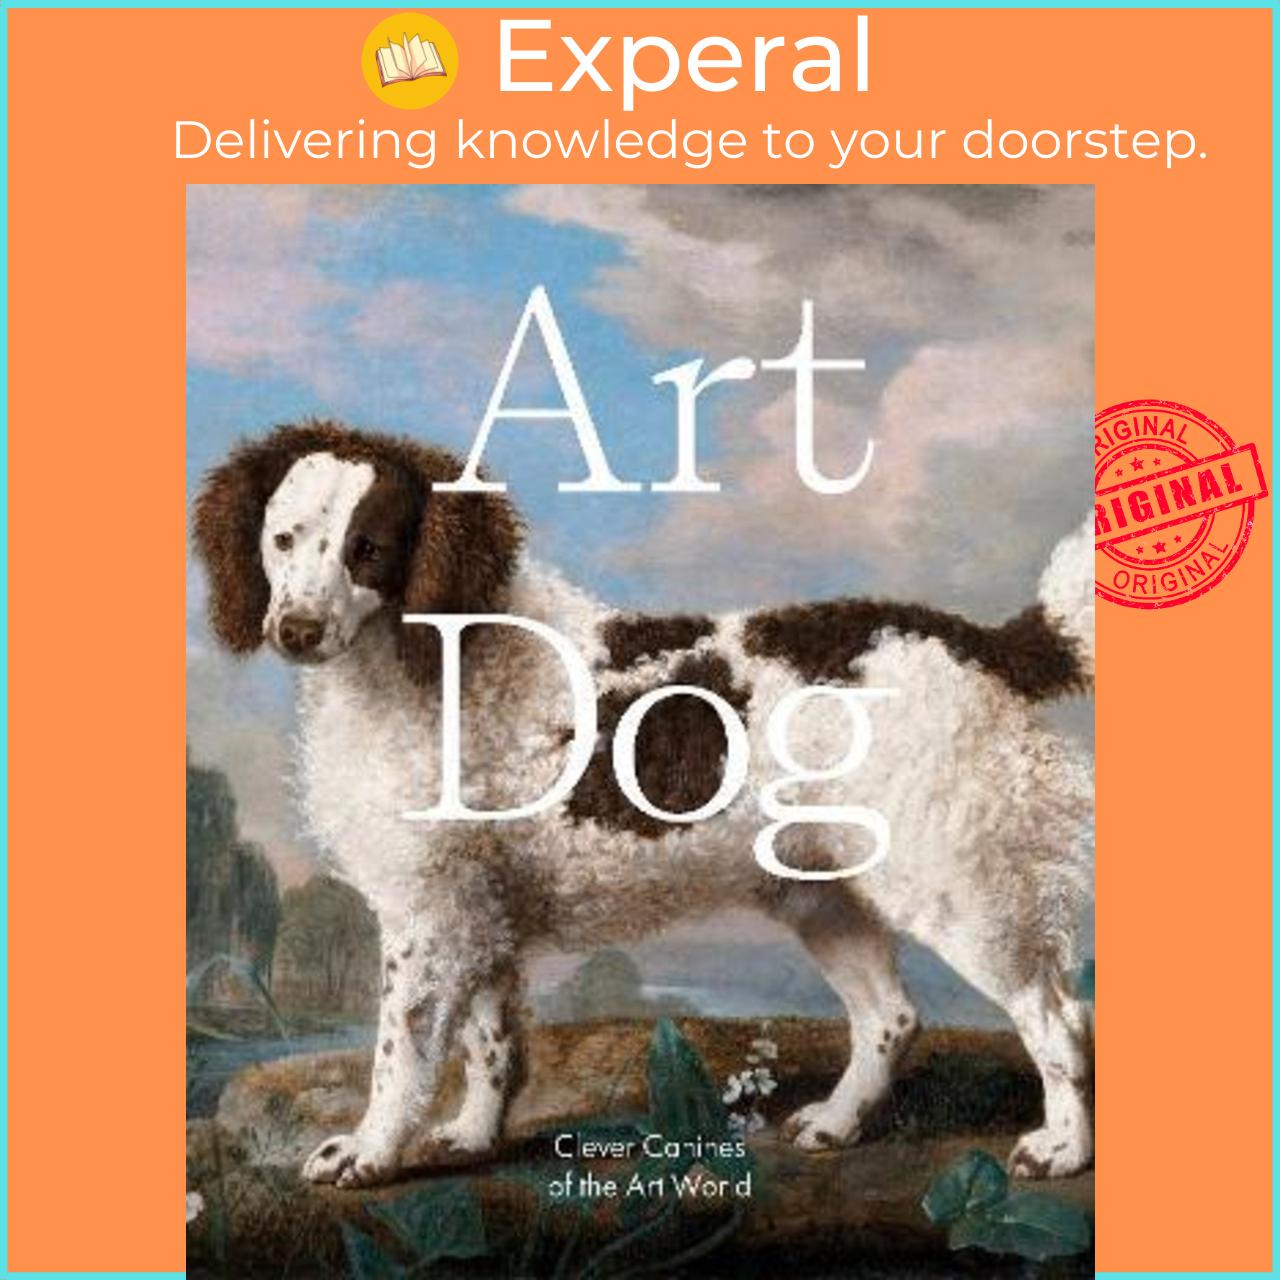 Sách - Art Dog : Clever Canines of the Art World by Smith Street Books (hardcover)